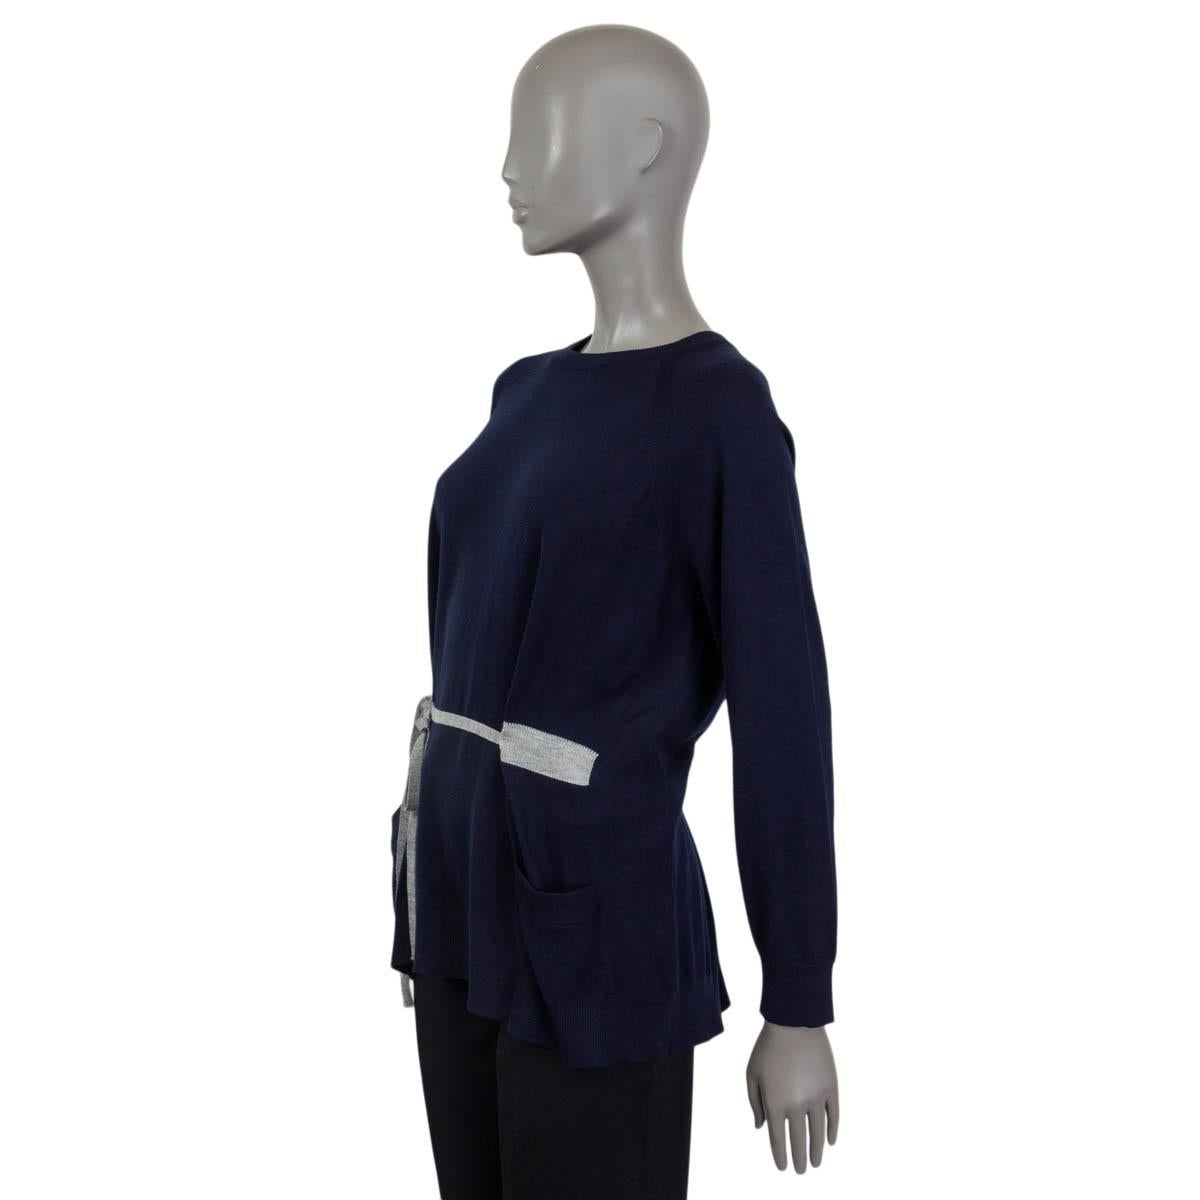 100% authentic Prada oversized raglan sleeve knit sweater in navy blue virgin wool with grey drawstring detail, two patch pockets at front and a buttoned back. Has been worn and is in excellent condition. 

Measurements
Tag Size	42
Size	M
Shoulder